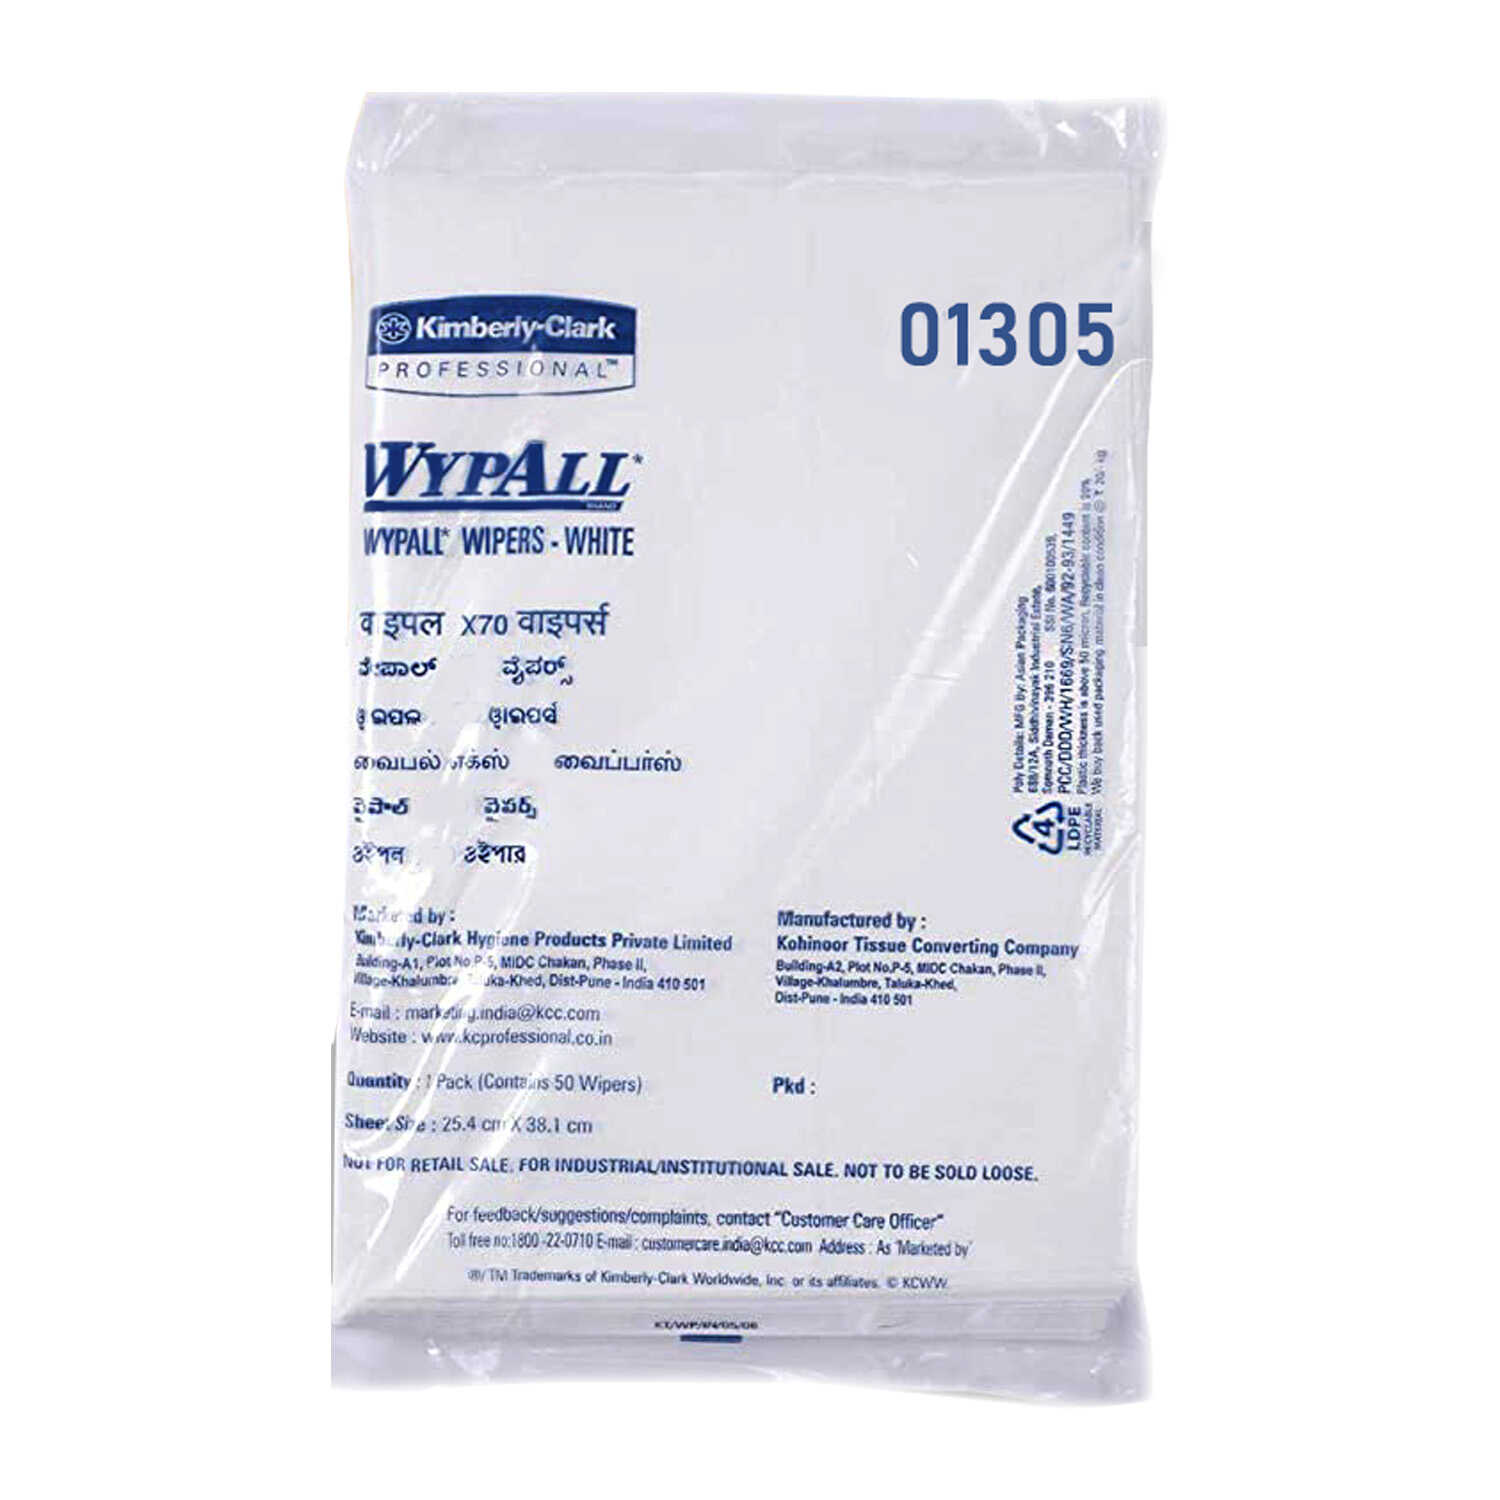 WYPALLs X70 Wipers / Flat Sheet / White / 25.4 cm x 38.1 cm, 1305 (Pack of 20)